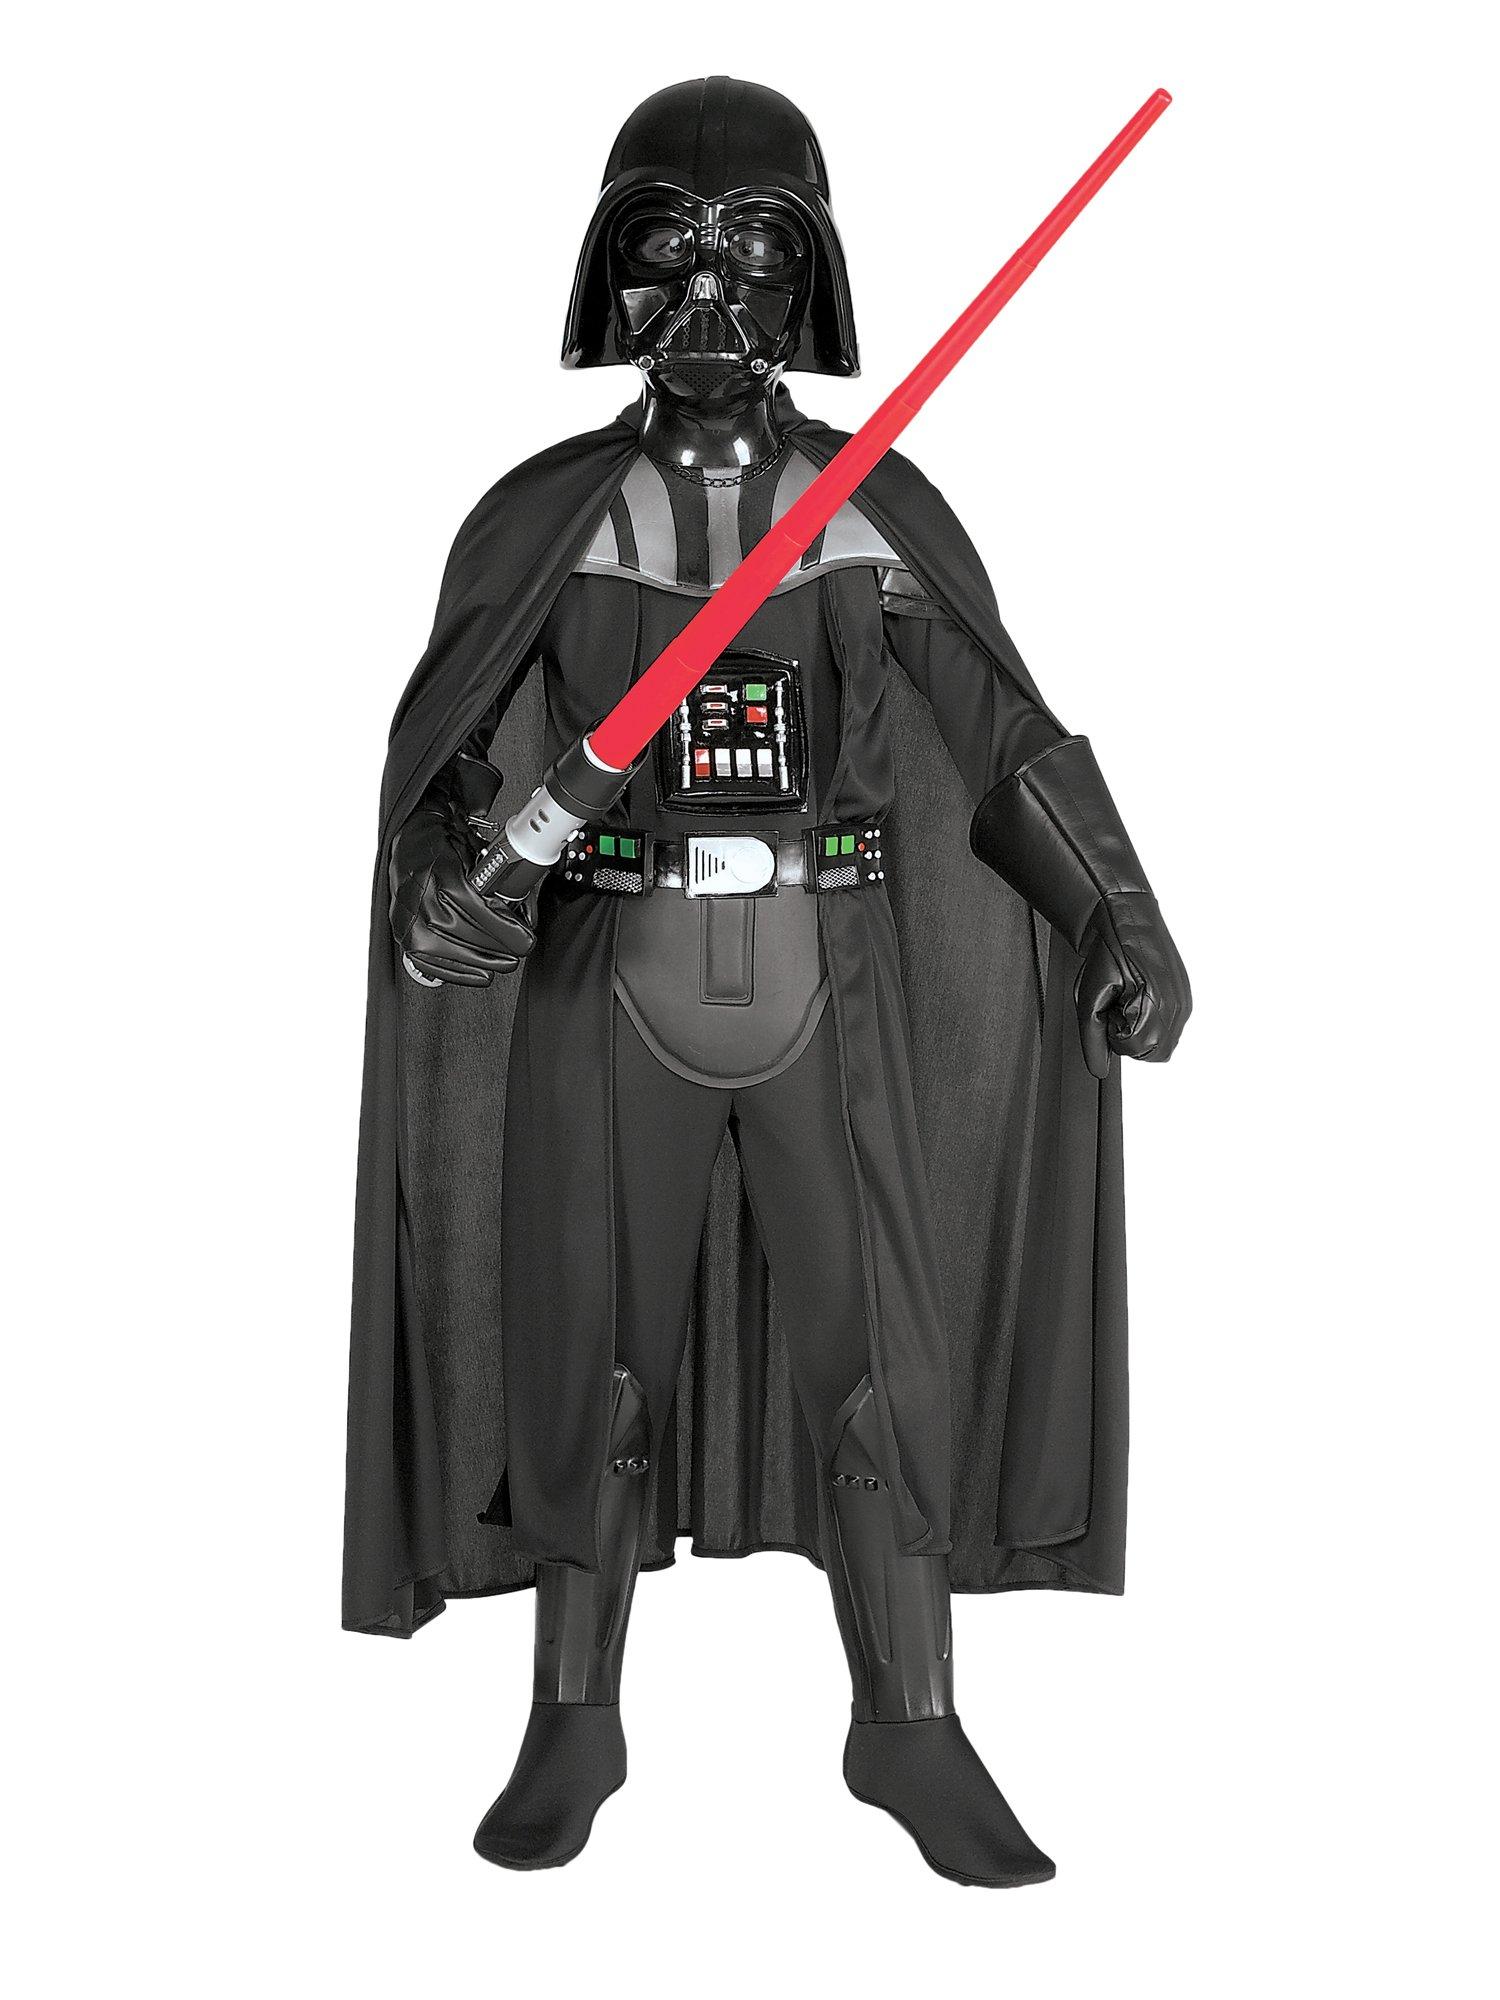 Kids Deluxe Darth Vader Costume From Star Wars Revenge Of The Sith